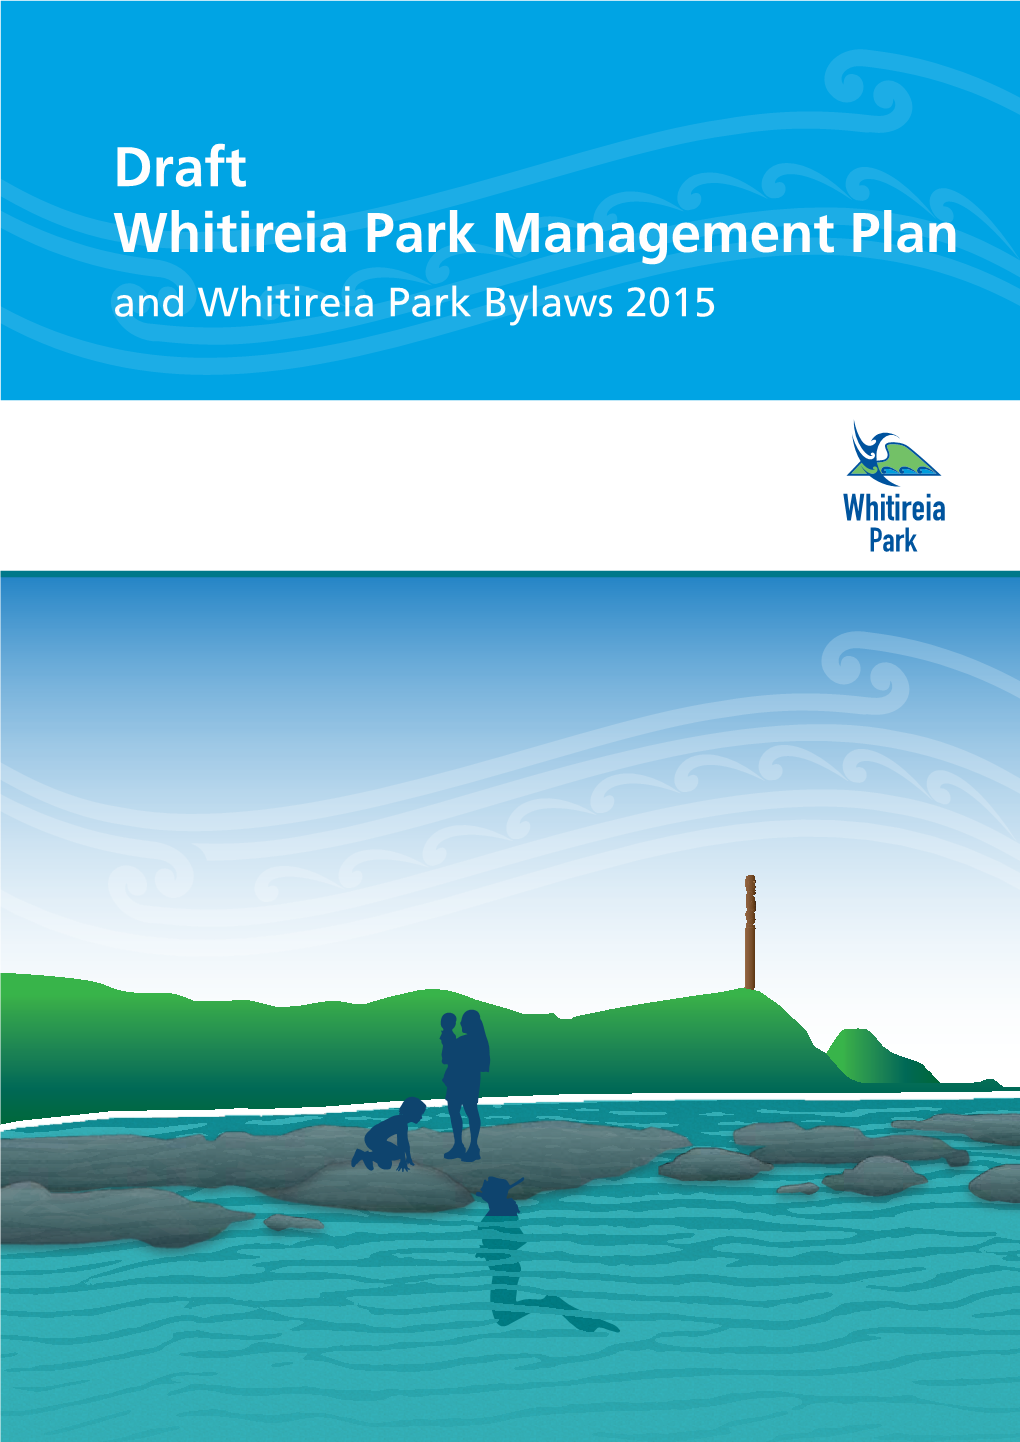 Draft Whitireia Park Management Plan and Whitireia Park Bylaws 2015